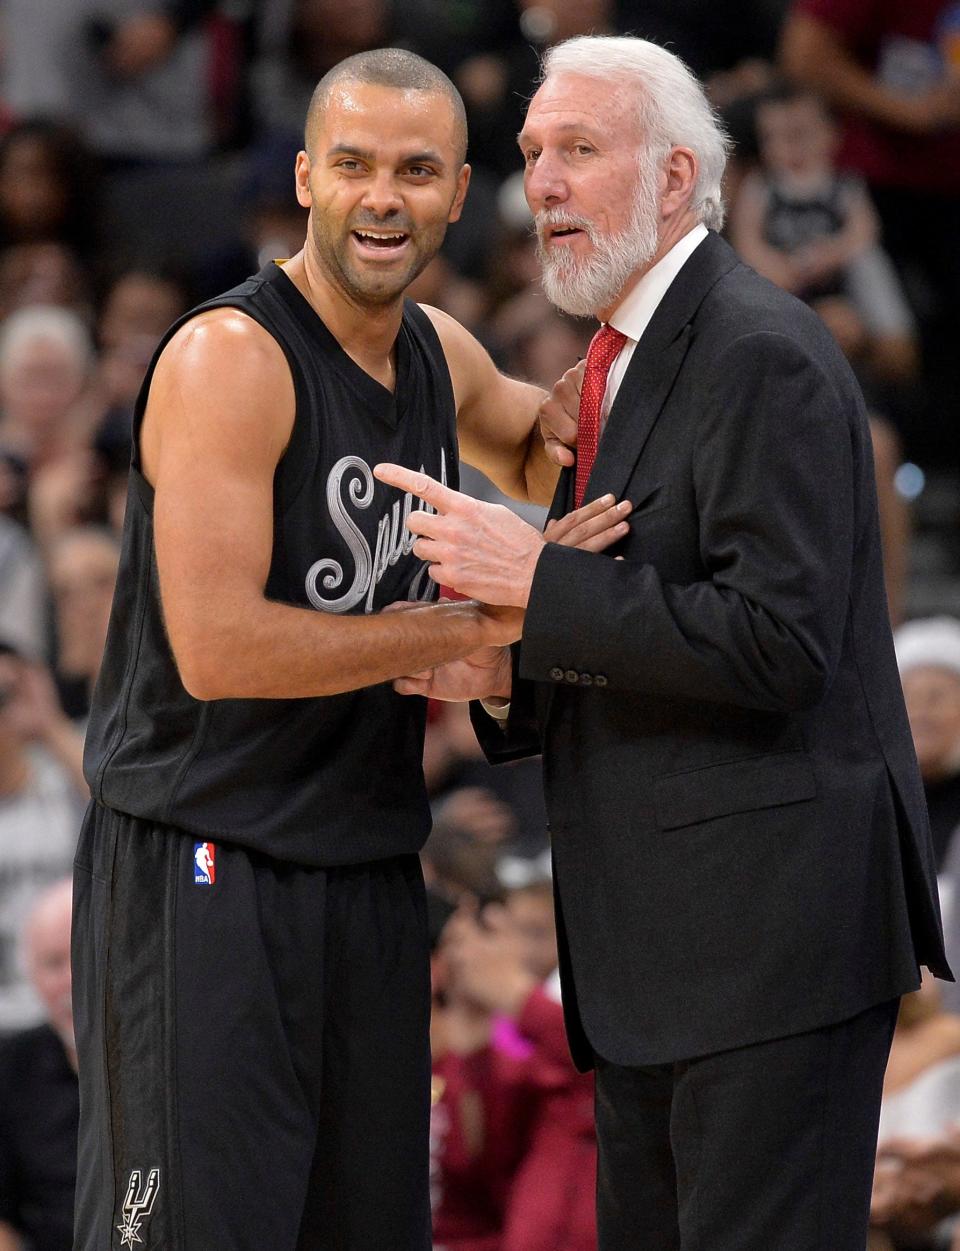 Gregg Popovich shares a moment with guard Tony Parker during a game in 2016.